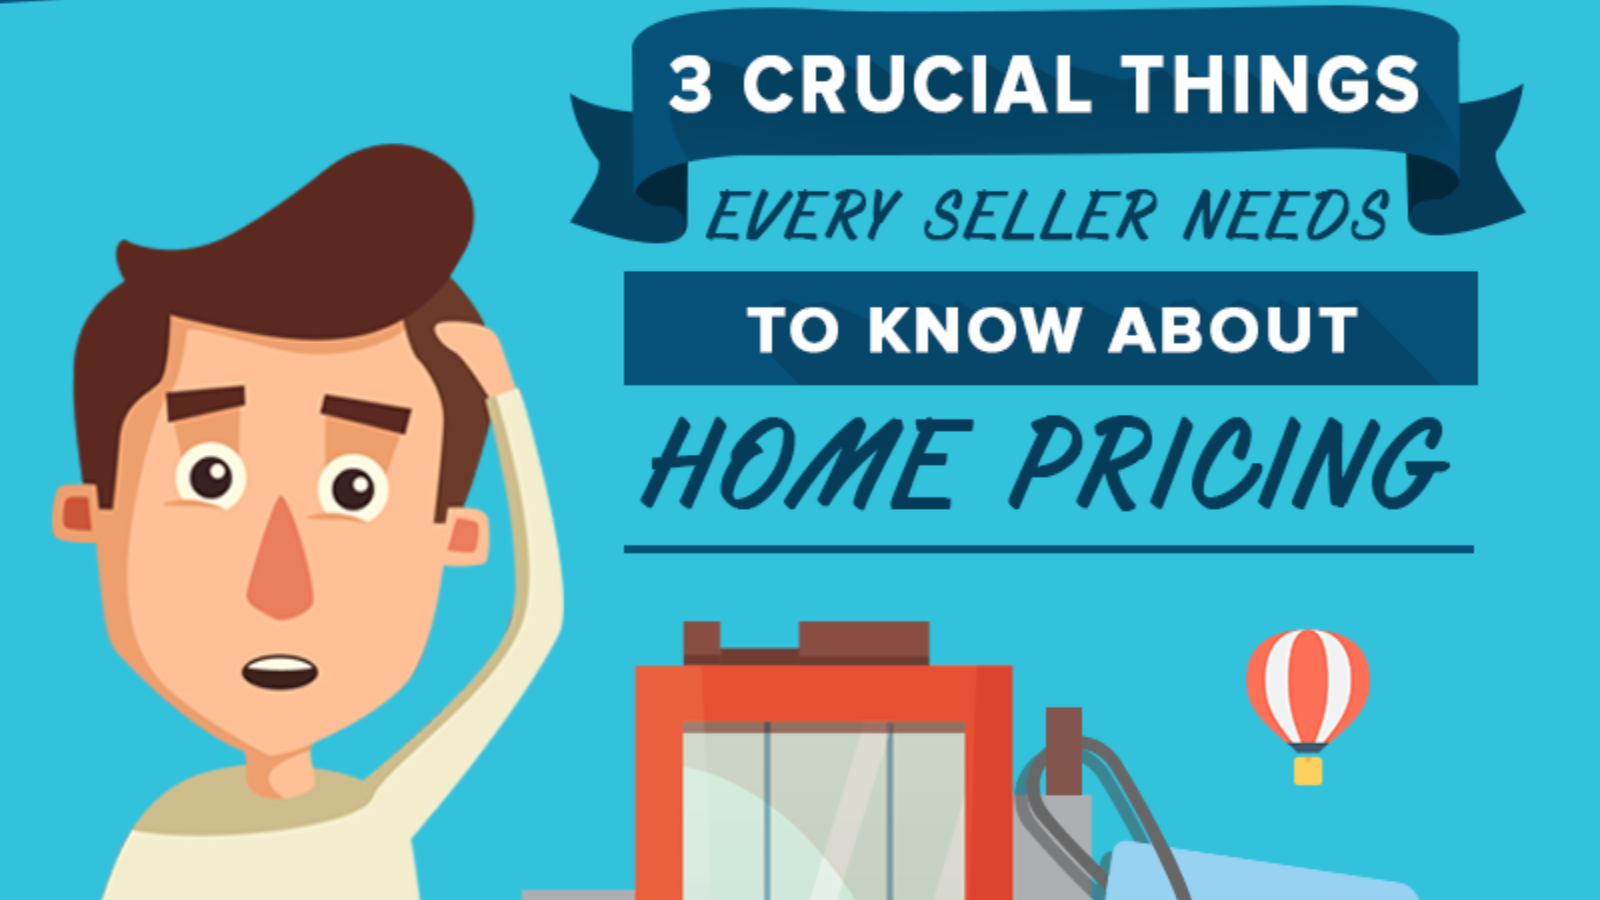 3 Crucial Things Every Seller Needs To Know About Pricing Their Home